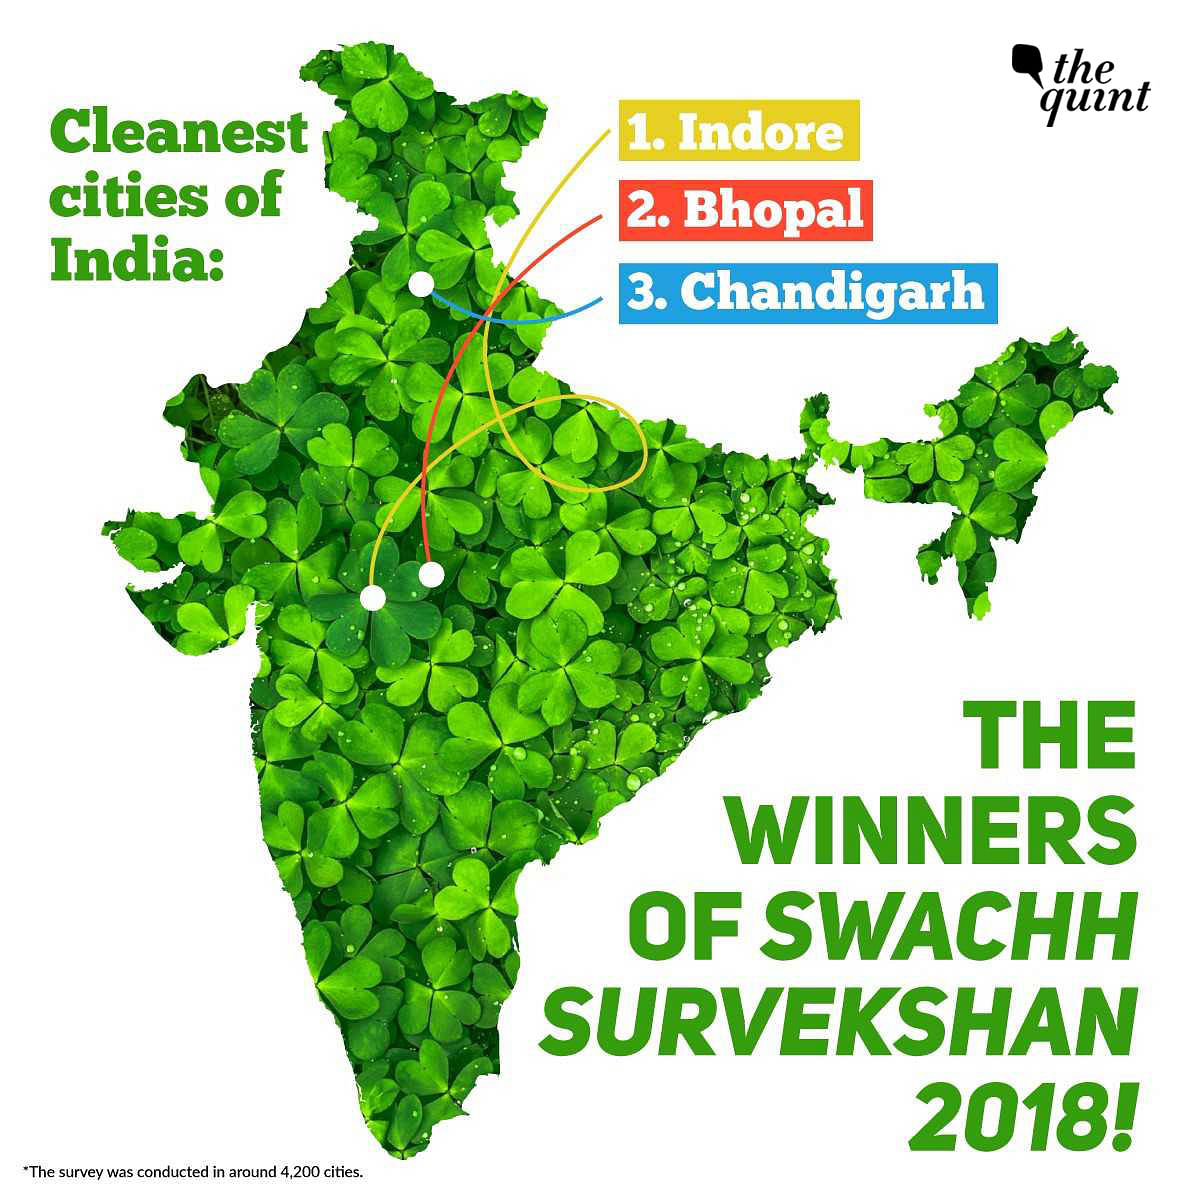 Indore retained its title as the cleanest city, followed by Bhopal and Chandigarh in the cleanliness survey.